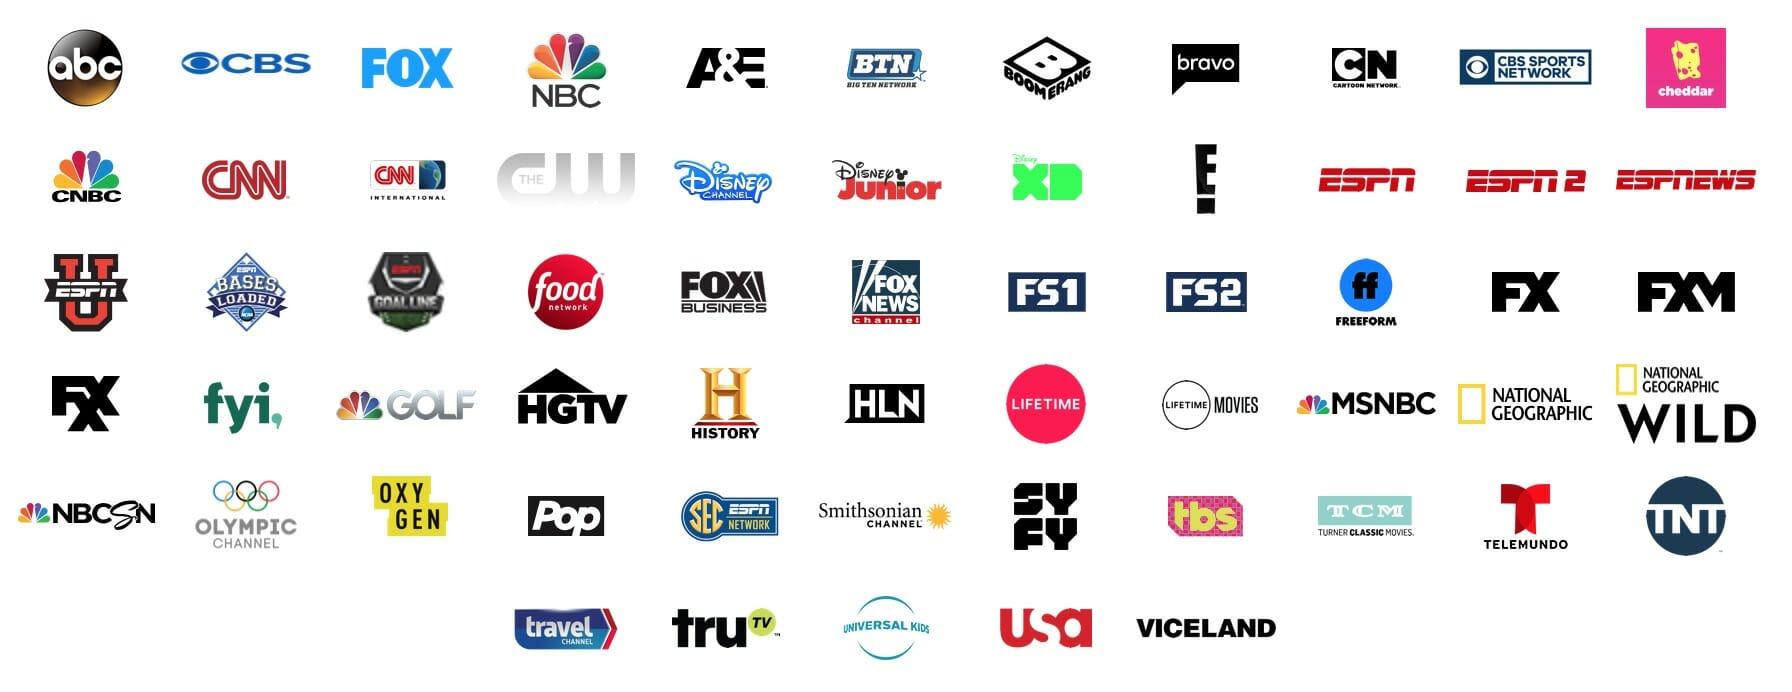 Hulu Company Logo - Hulu Live TV Channels: The Complete Channel List, Devices & Add-ons